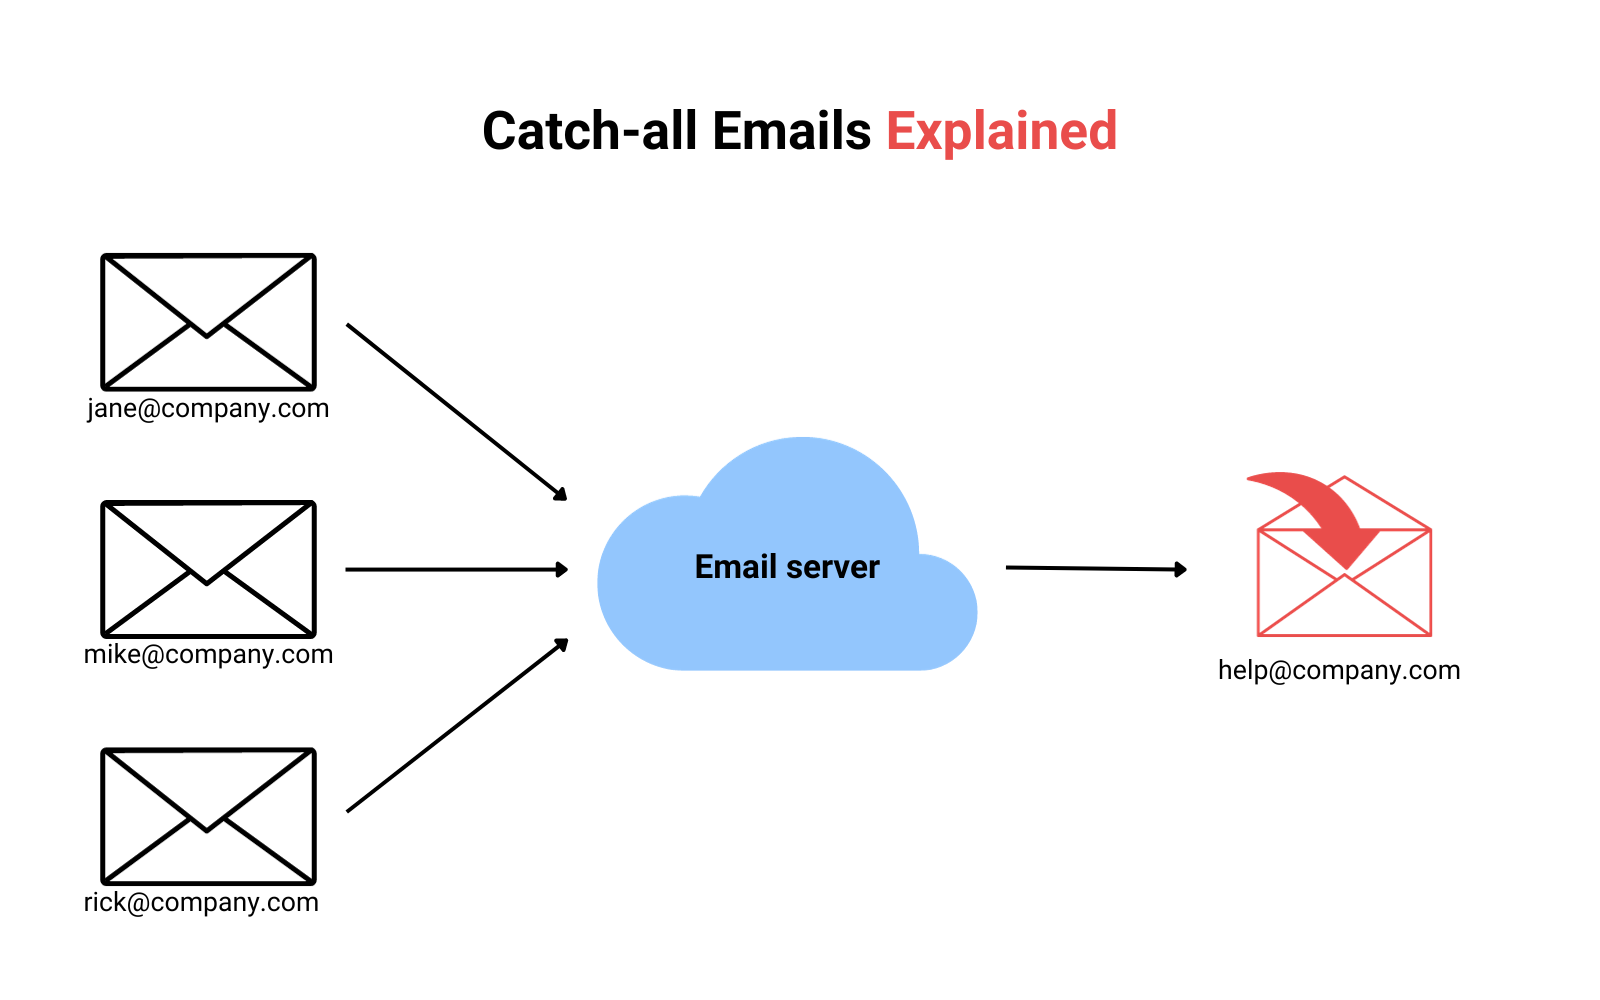 Catch all email explained by a diagram